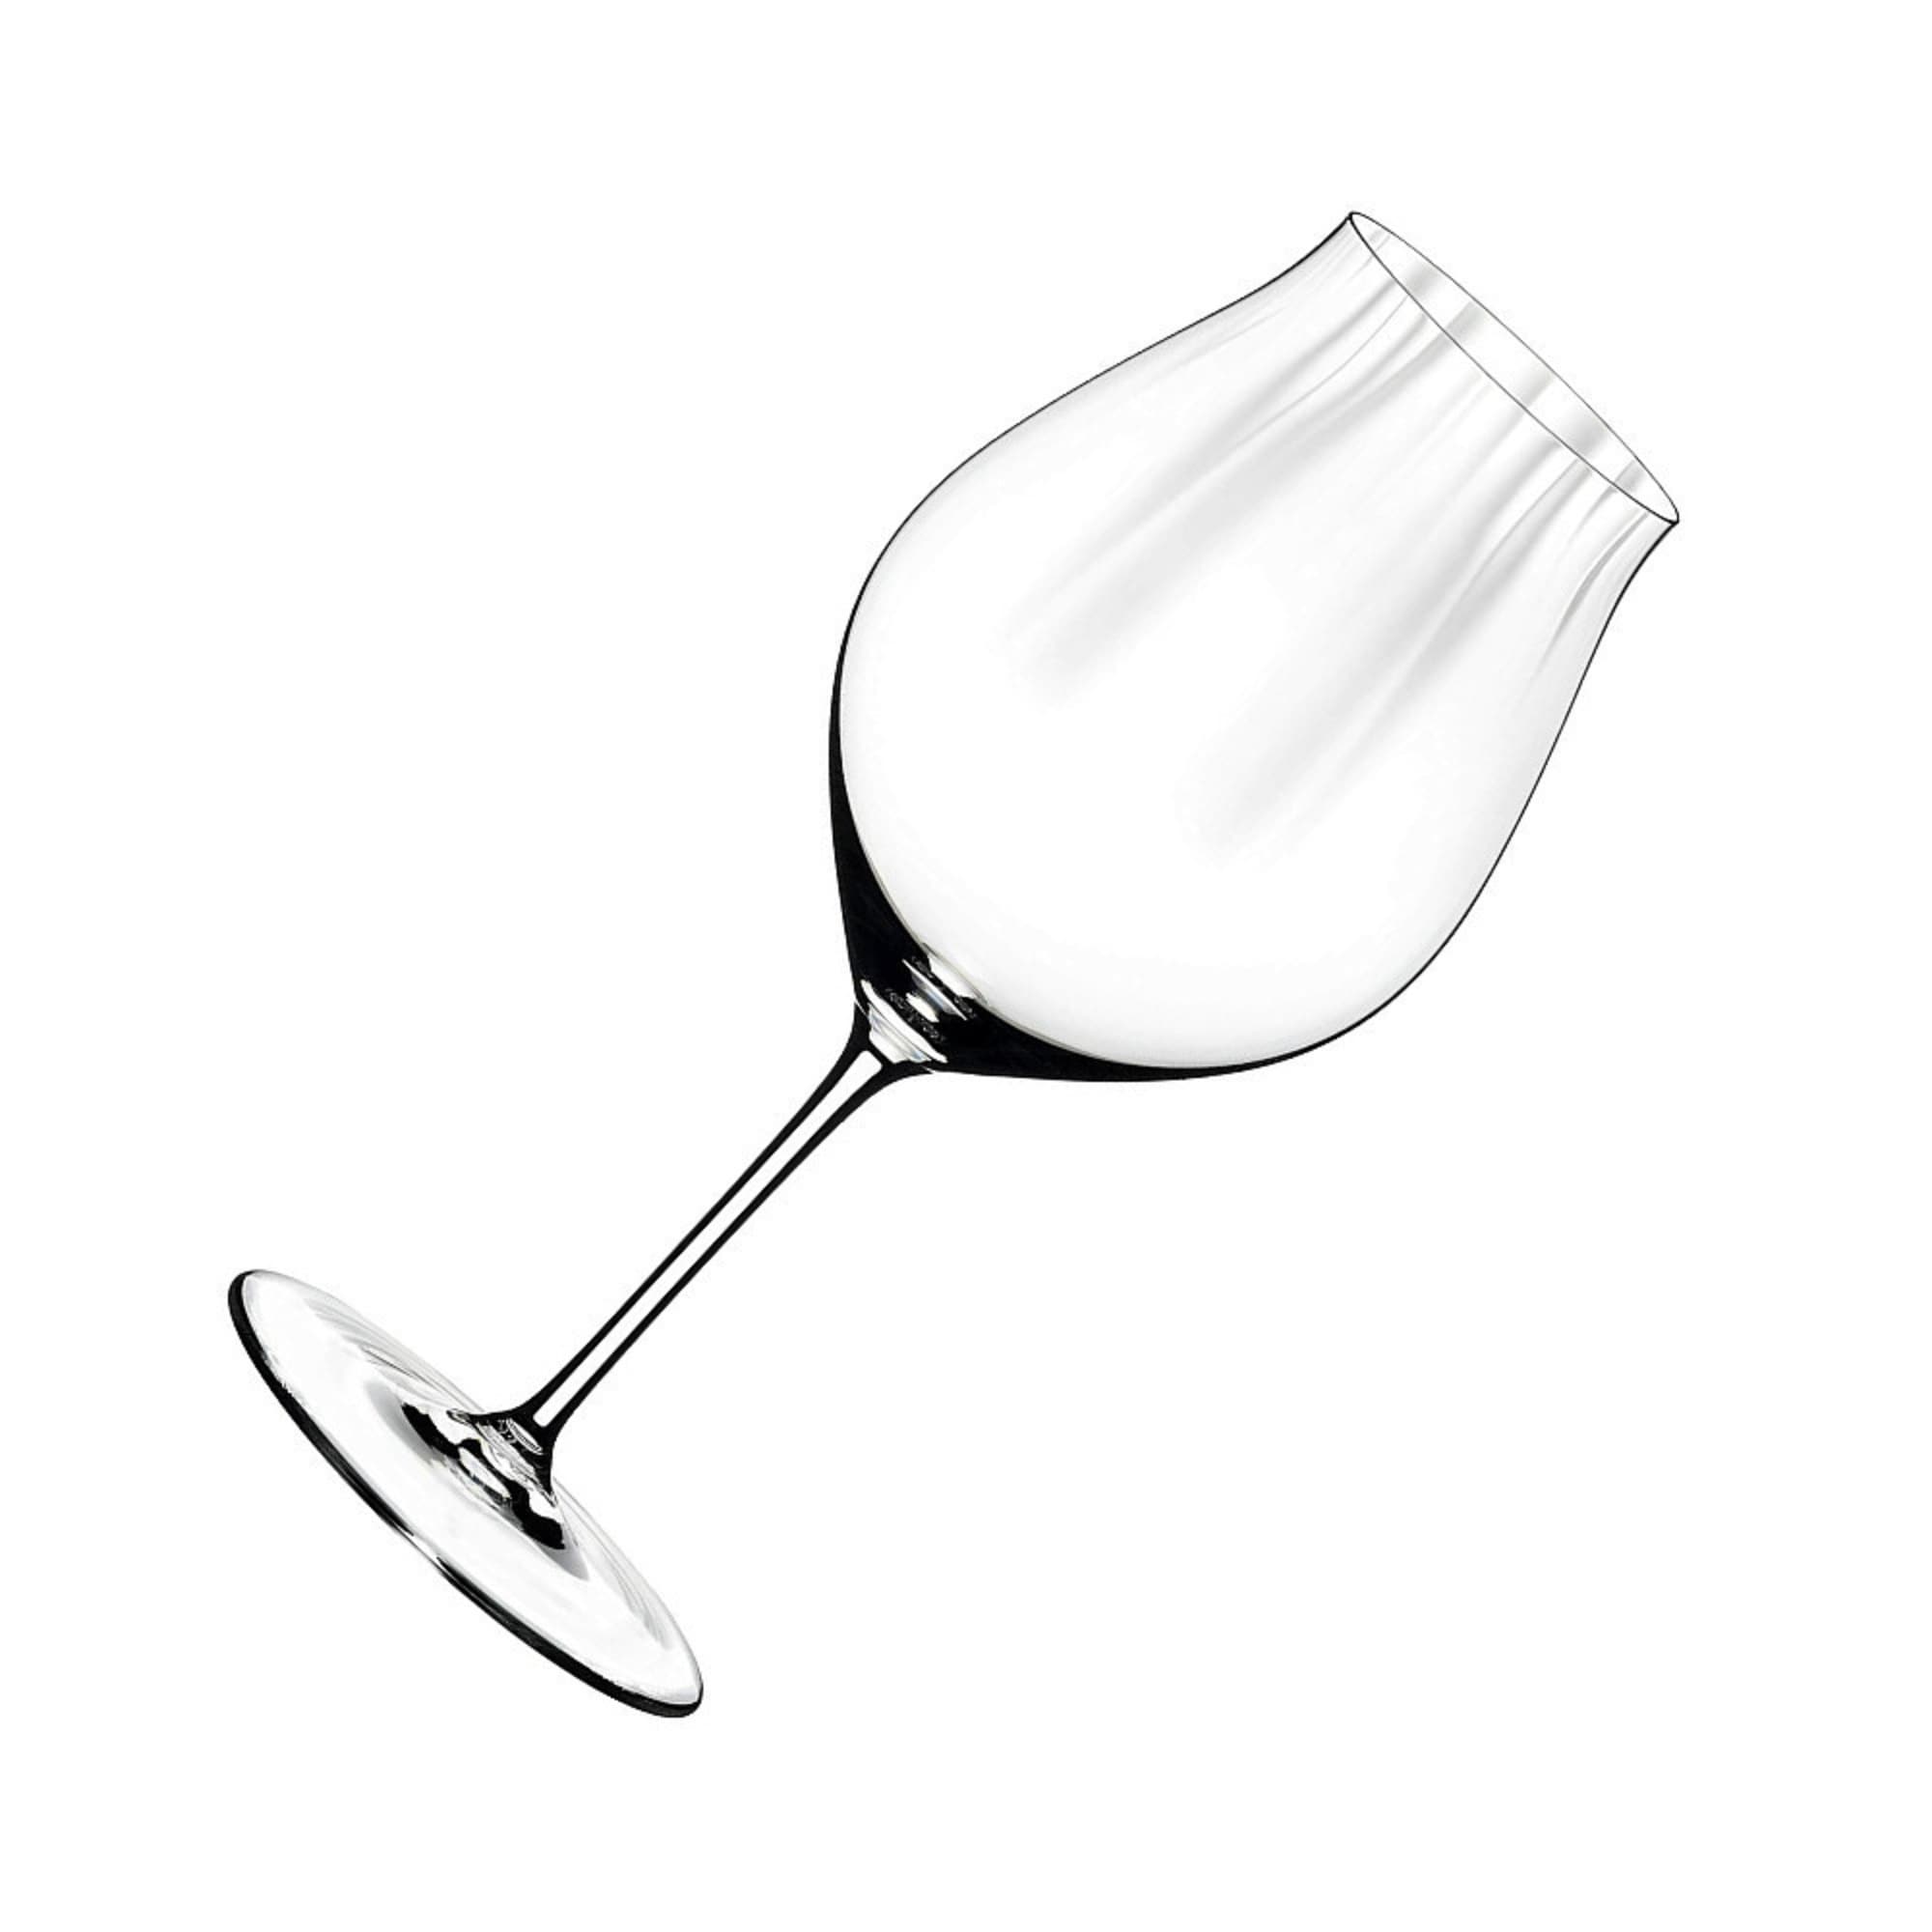 https://ak1.ostkcdn.com/images/products/is/images/direct/9c1429508a3df7ac599e4bd5c6451eb2b9b9bd89/Riedel-Performance-Pinot-Noir-Wine-Glass-%284-Pack%29-with-Cloth-Bundle.jpg